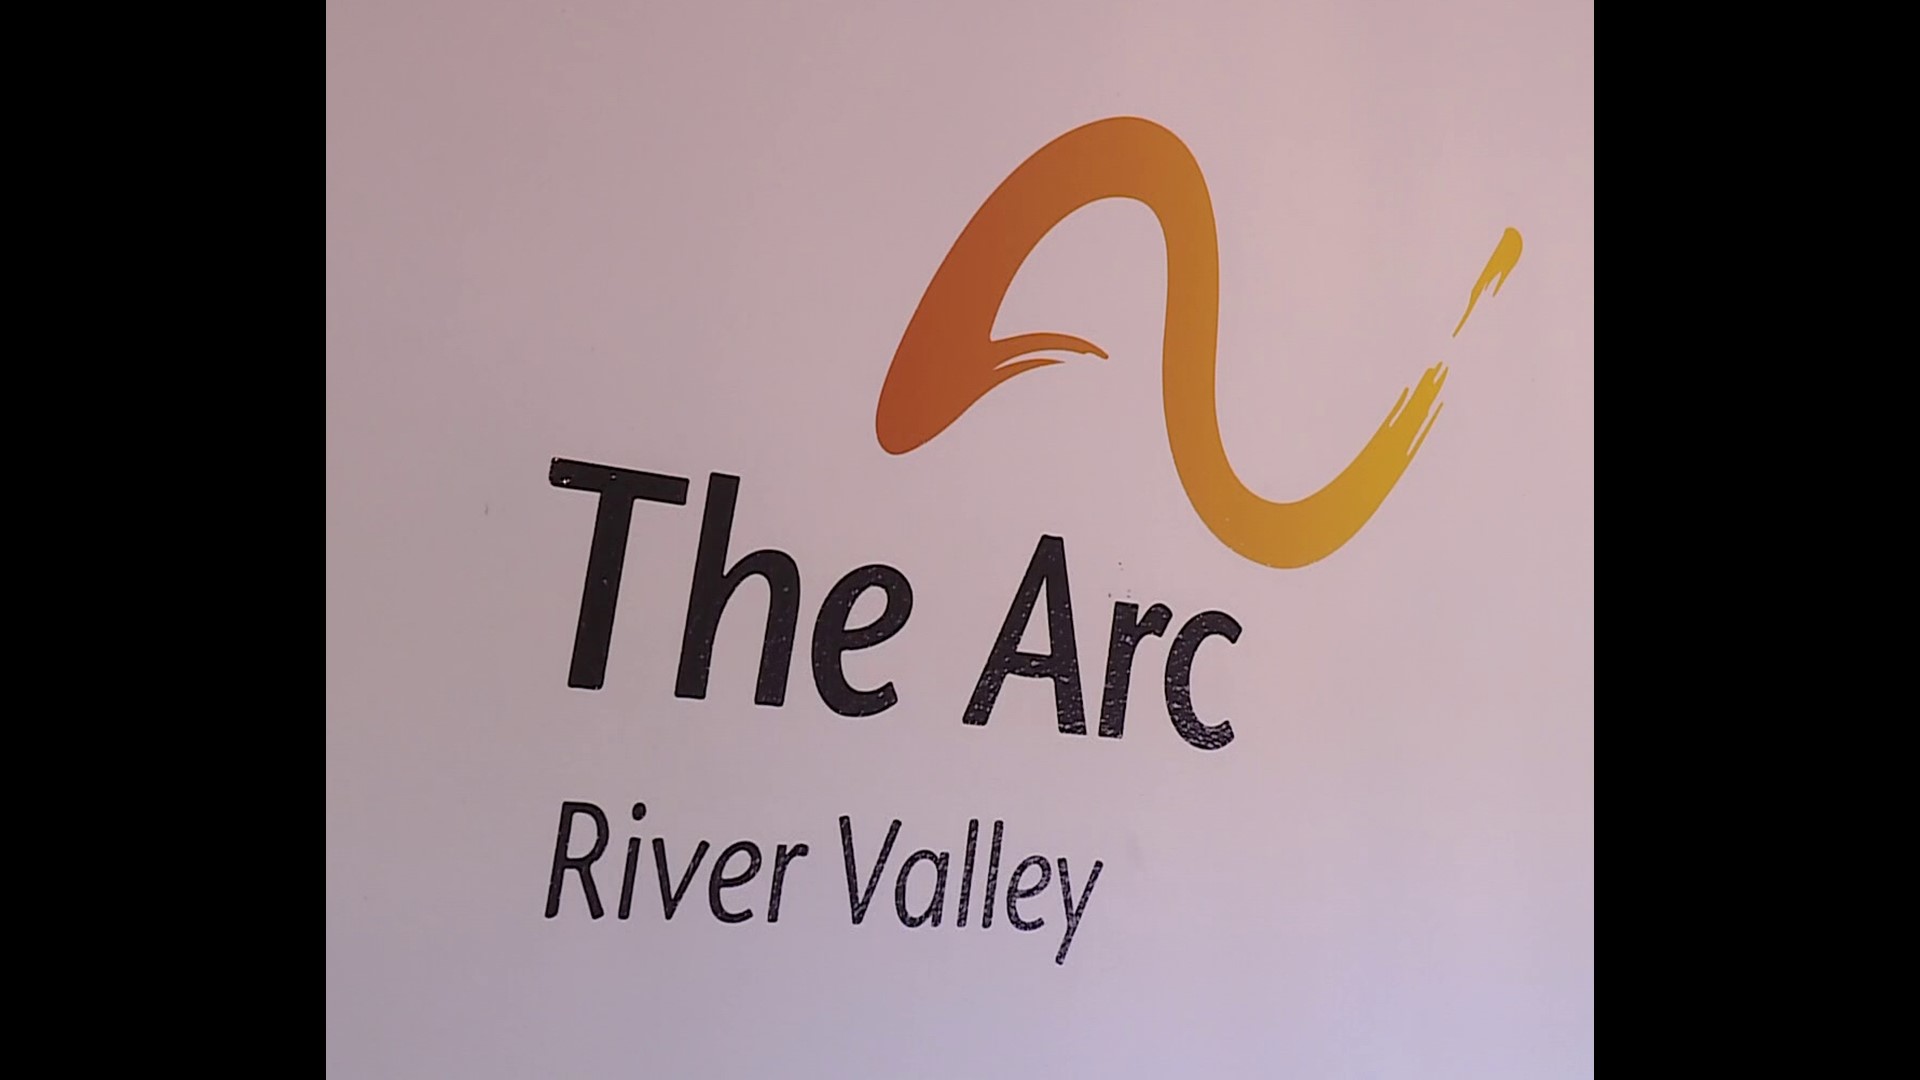 The fundraising event is called Spark for the Arc.  Daren visits with The Arc Executive Director about the agency and the event in November.